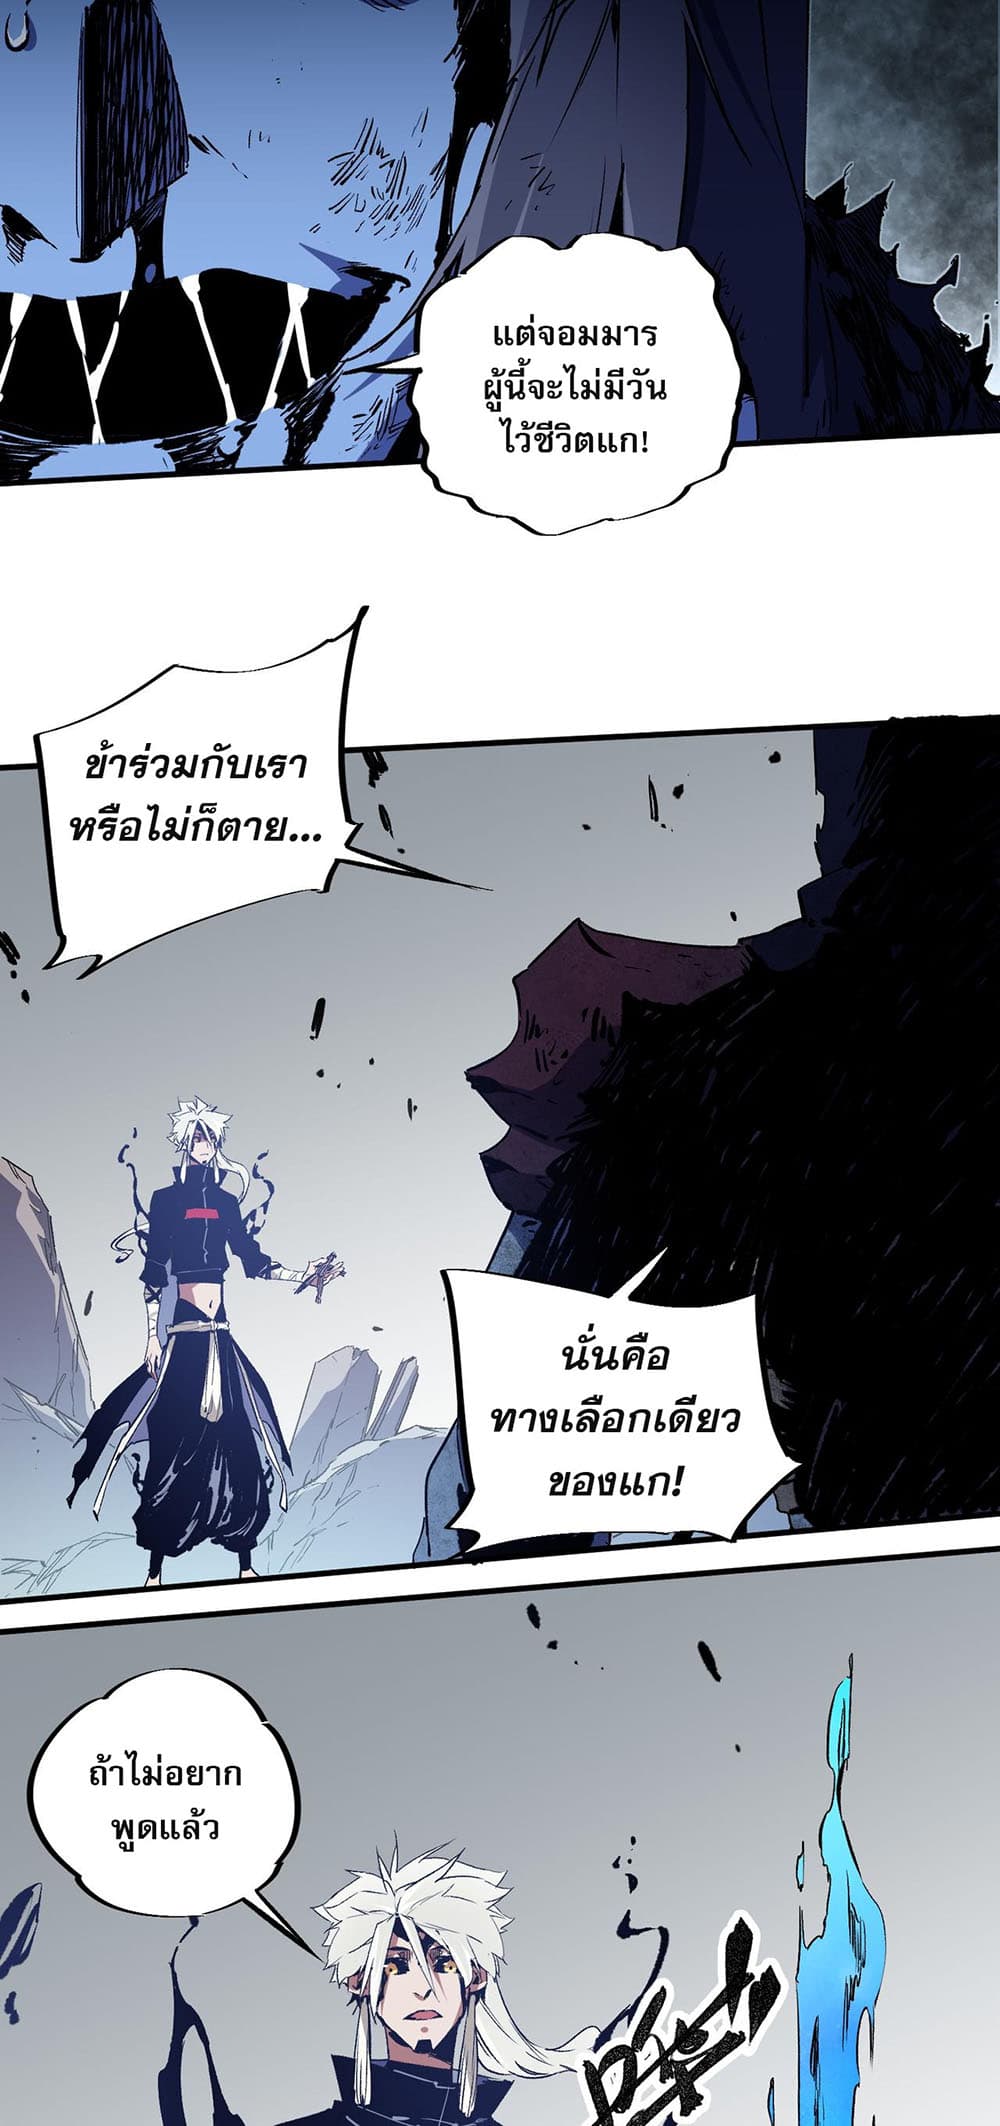 Job Changing for the Entire Population: The Jobless Me Will Terminate the Gods ฉันคือผู้เล่นไร้อาชีพที่สังหารเหล่าเทพ 54-54